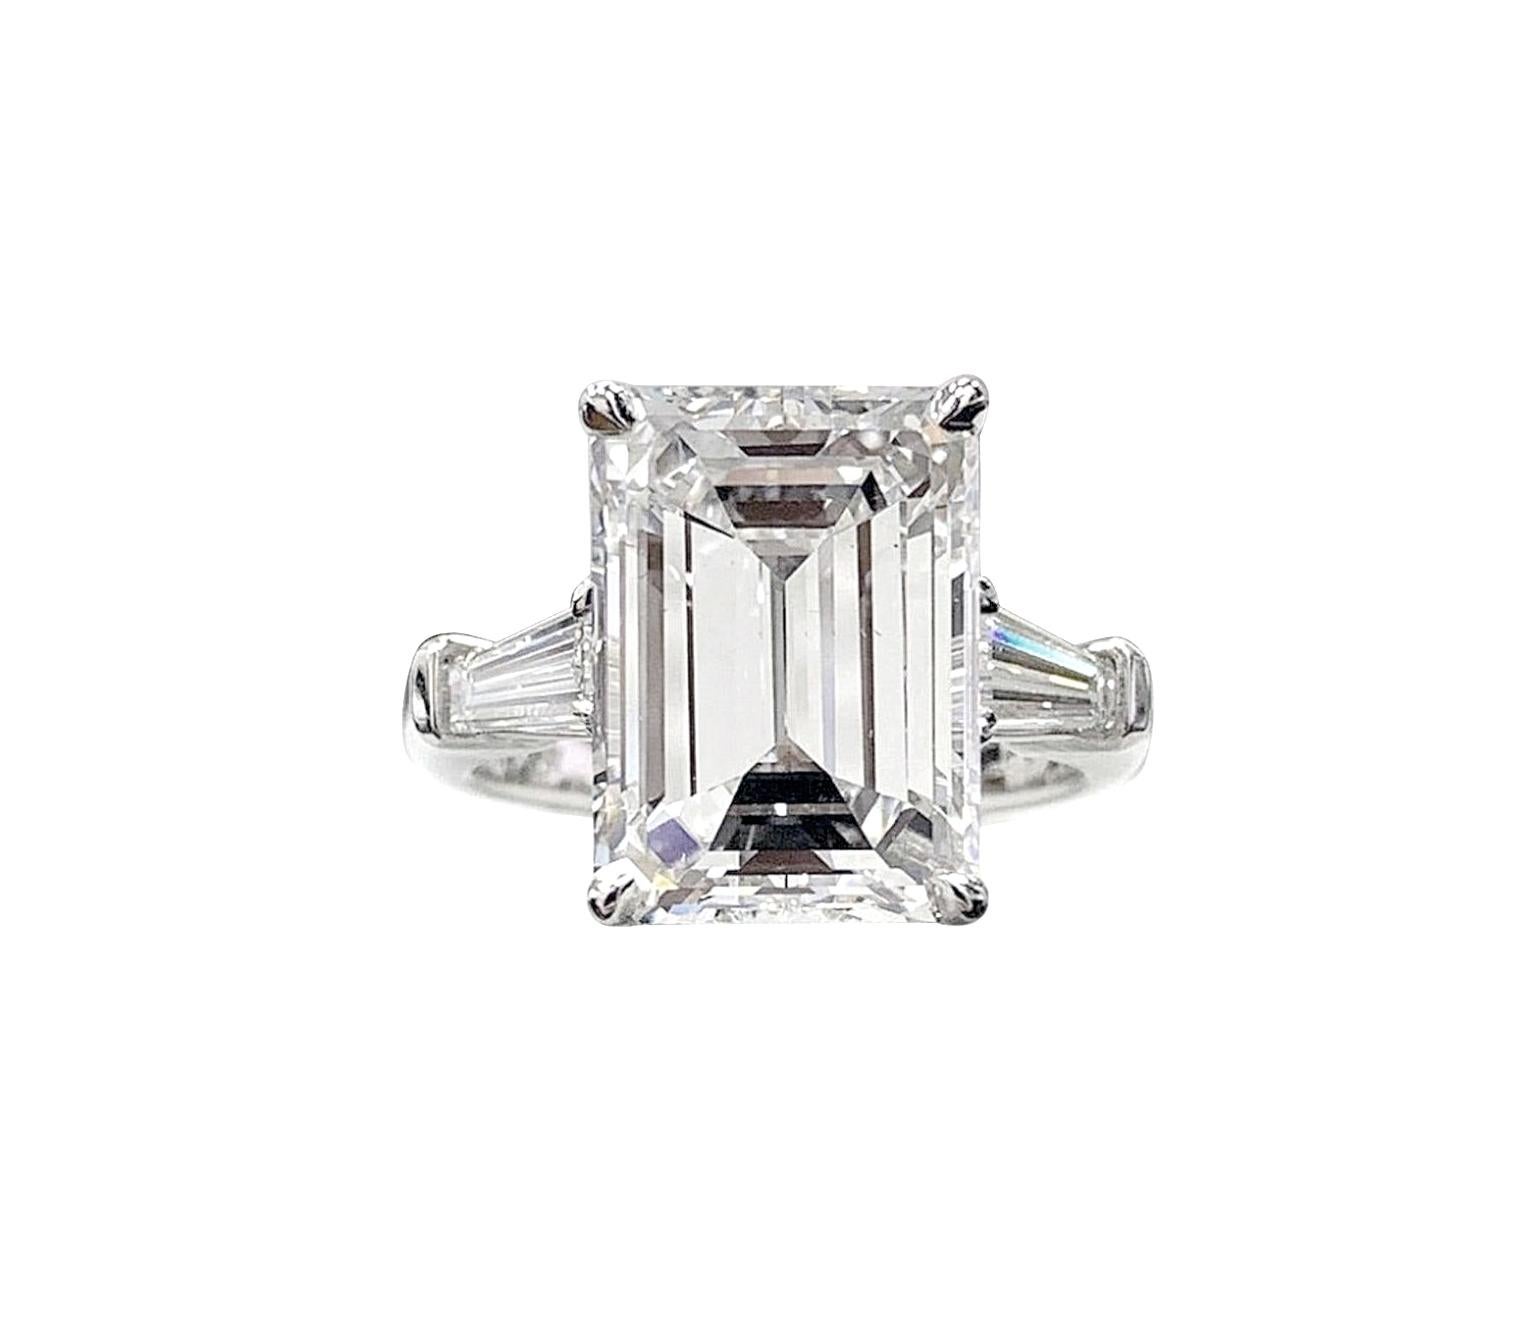 Elevate your love story with this enchanting GIA Certified 3 Carat Emerald Cut Diamond Ring, a true testament to sophistication and timeless beauty. The centerpiece of this exquisite ring is a GIA-certified 3-carat emerald cut diamond, renowned for